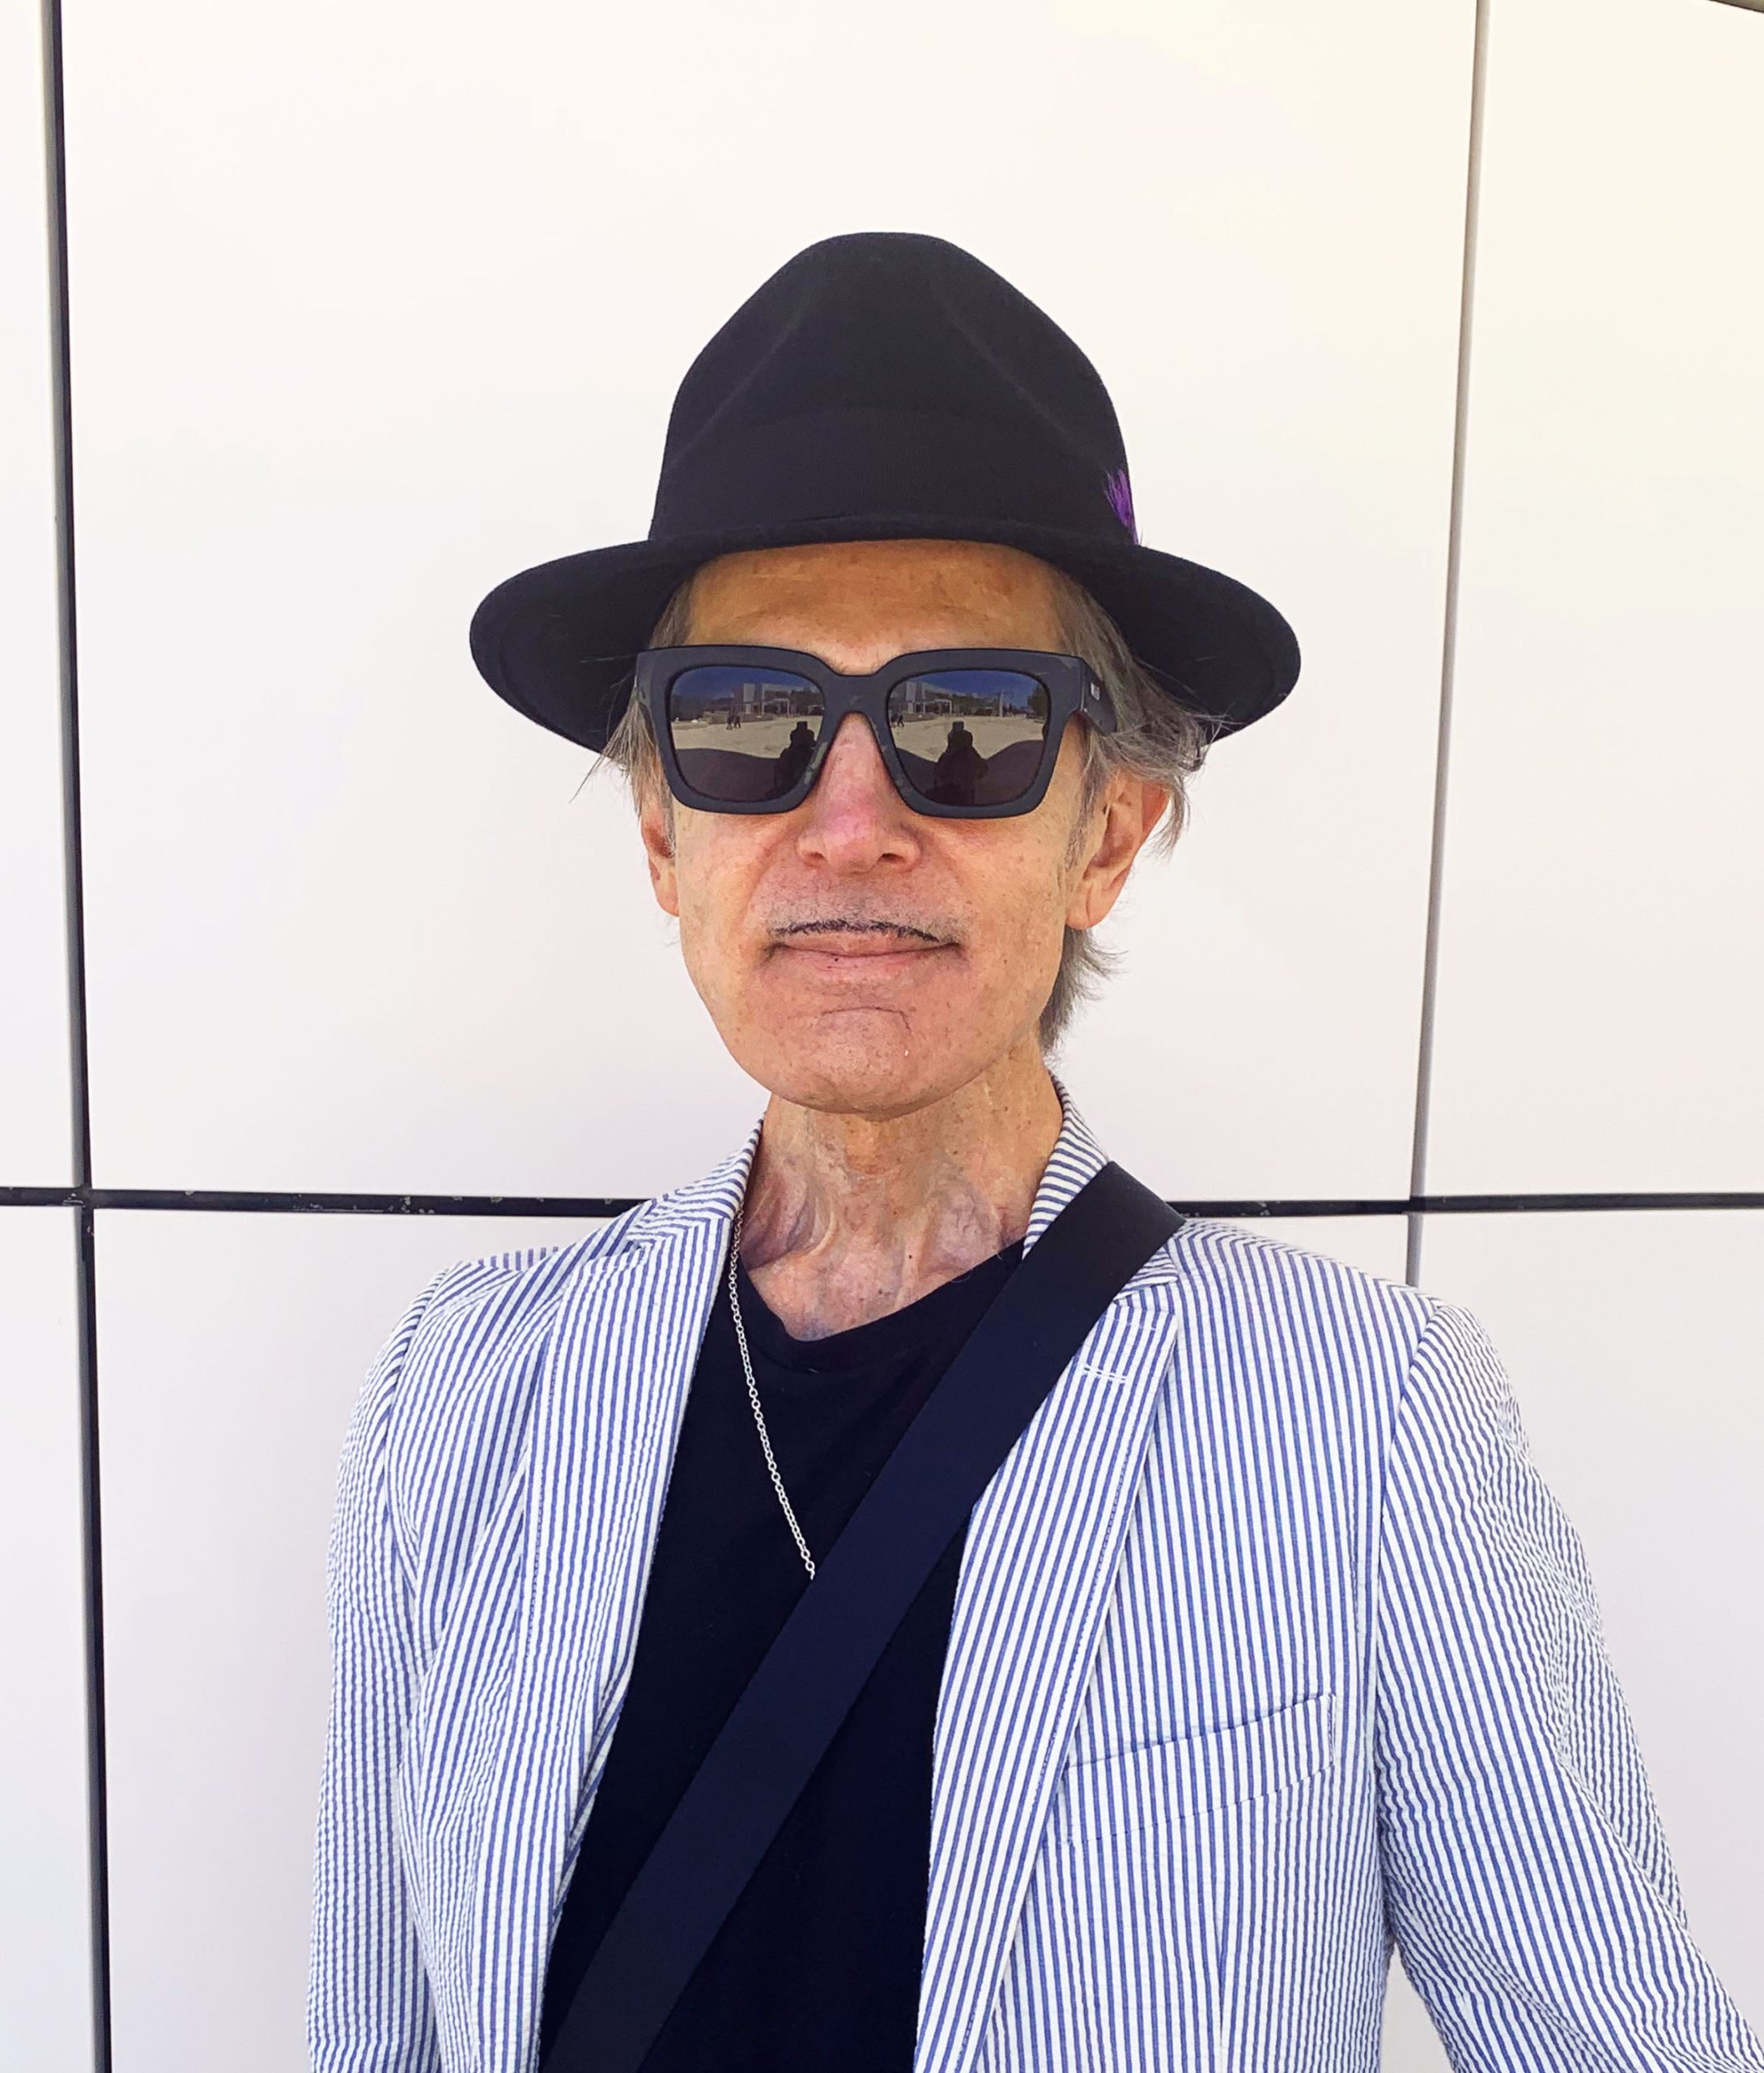 Color photo of man with hat and sunglasses